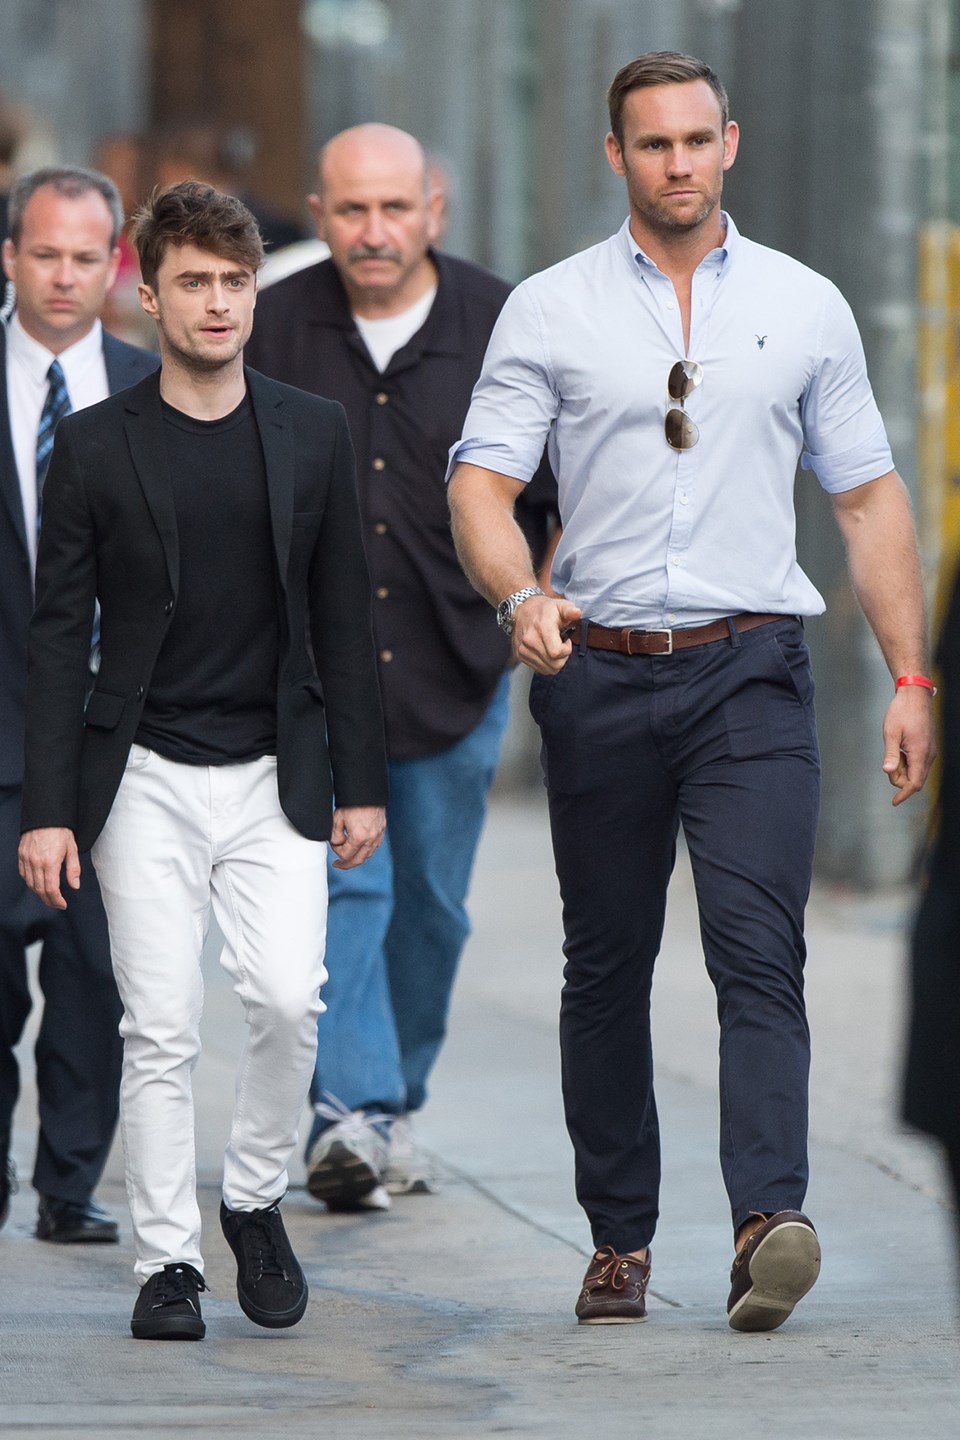 Celebrities dating their bodyguards